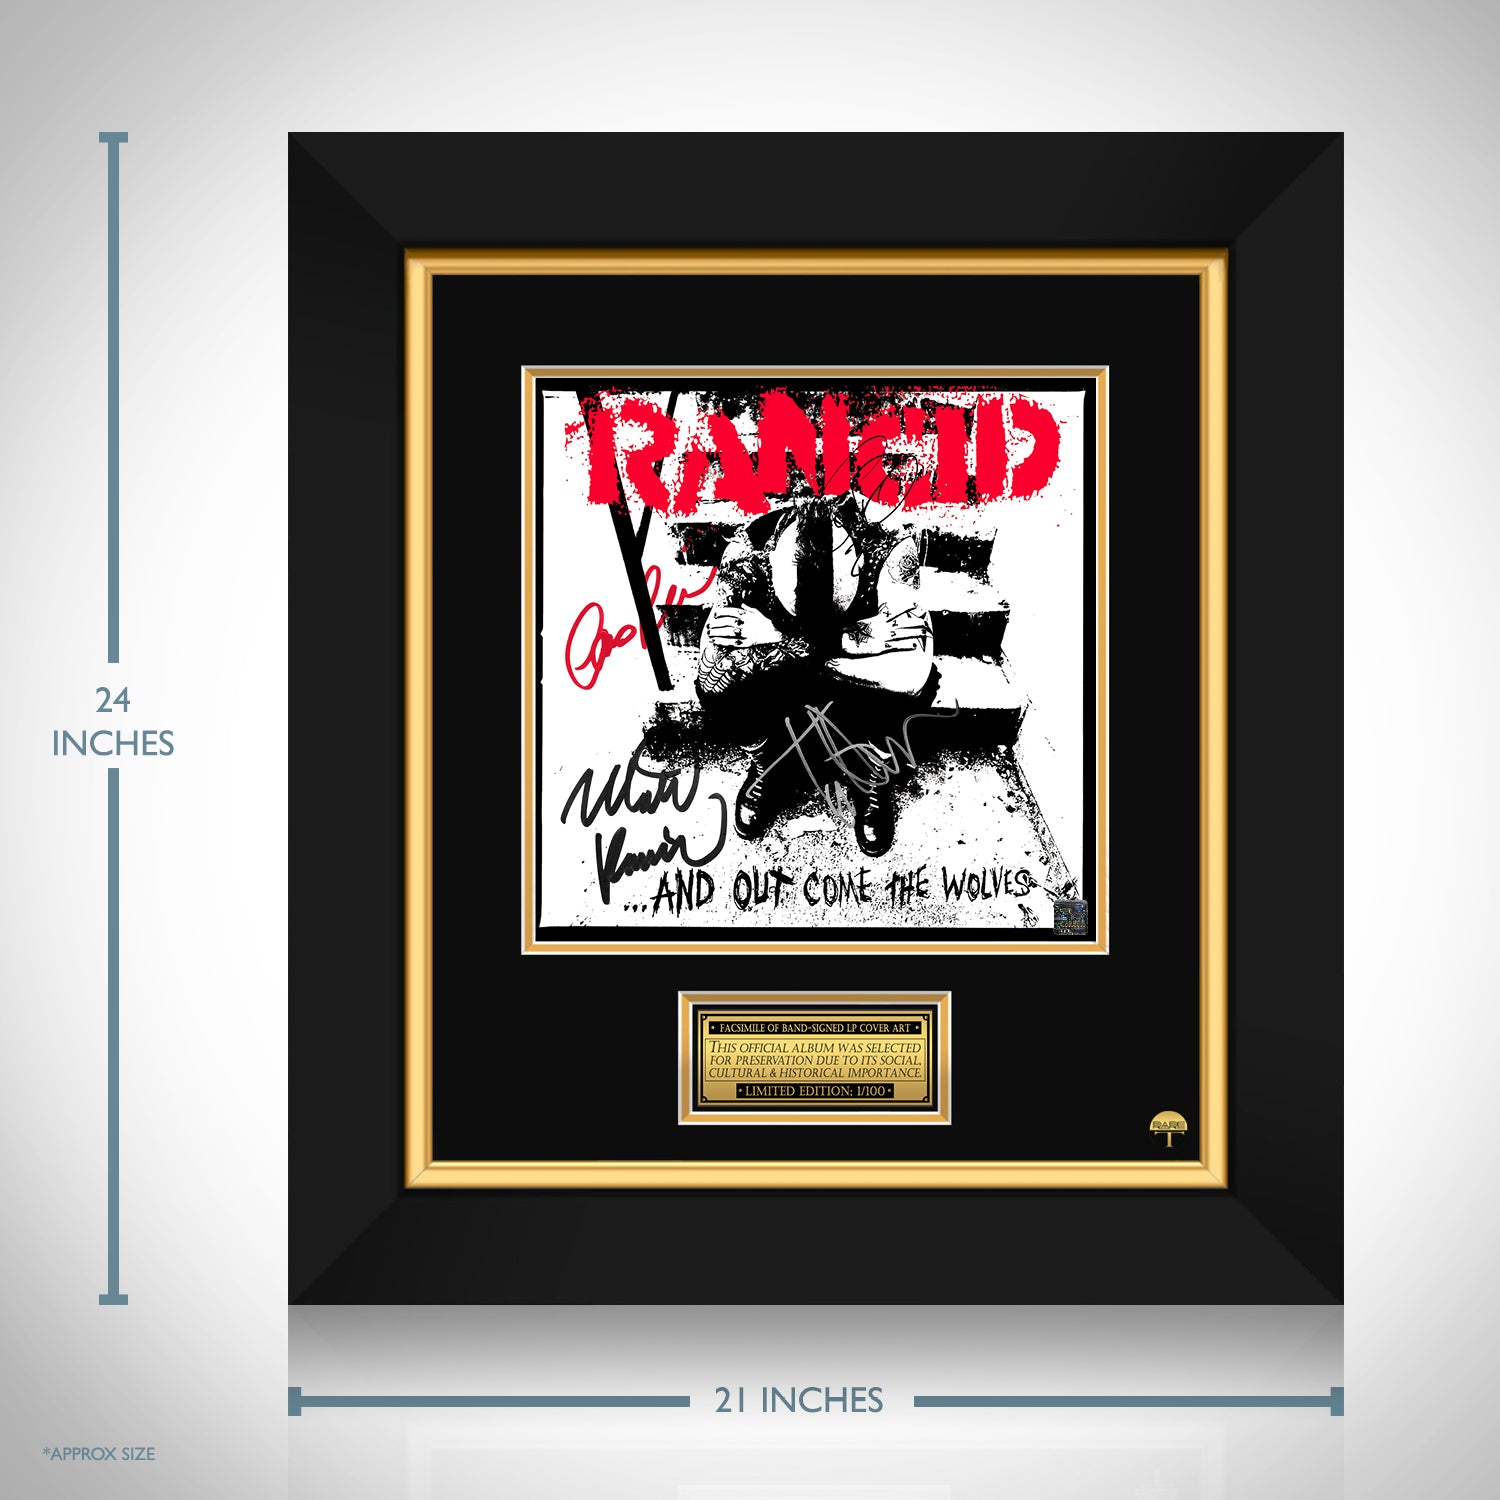 Rancid - And Out Come The Wolves LP Cover Limited Signature